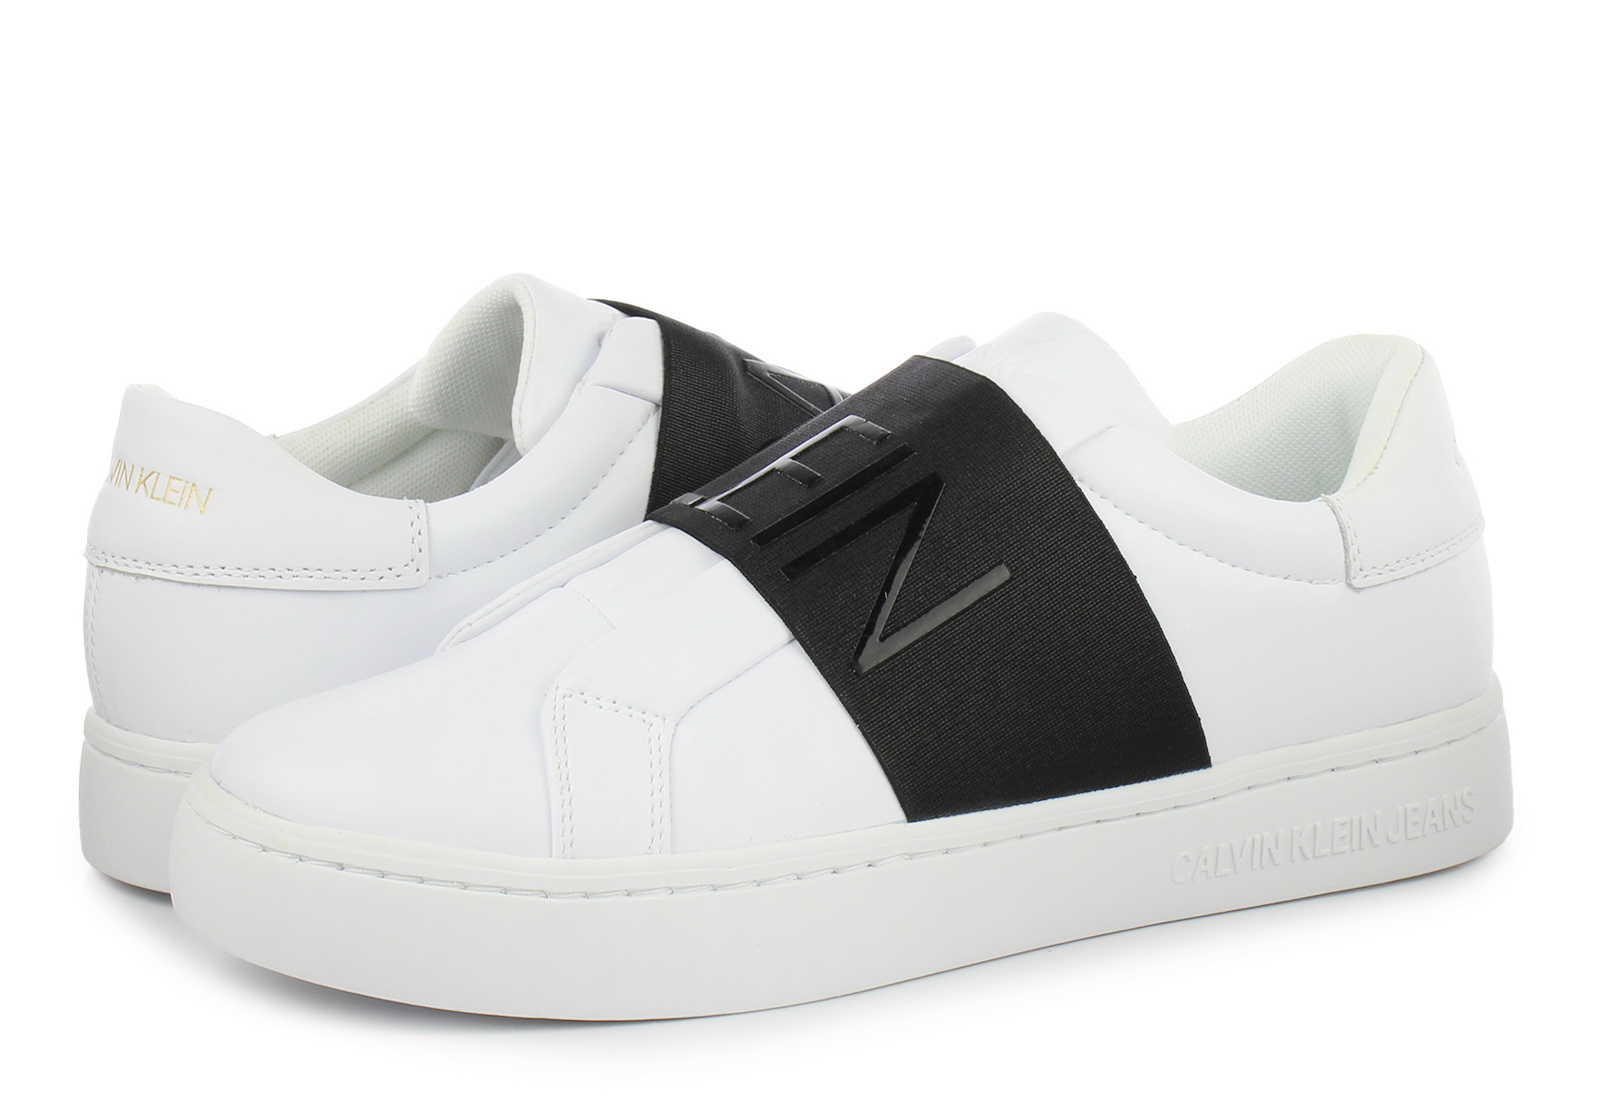 Calvin Klein Slip-ons - Sanai - YW00160-YAF - Online shop for sneakers,  shoes and boots